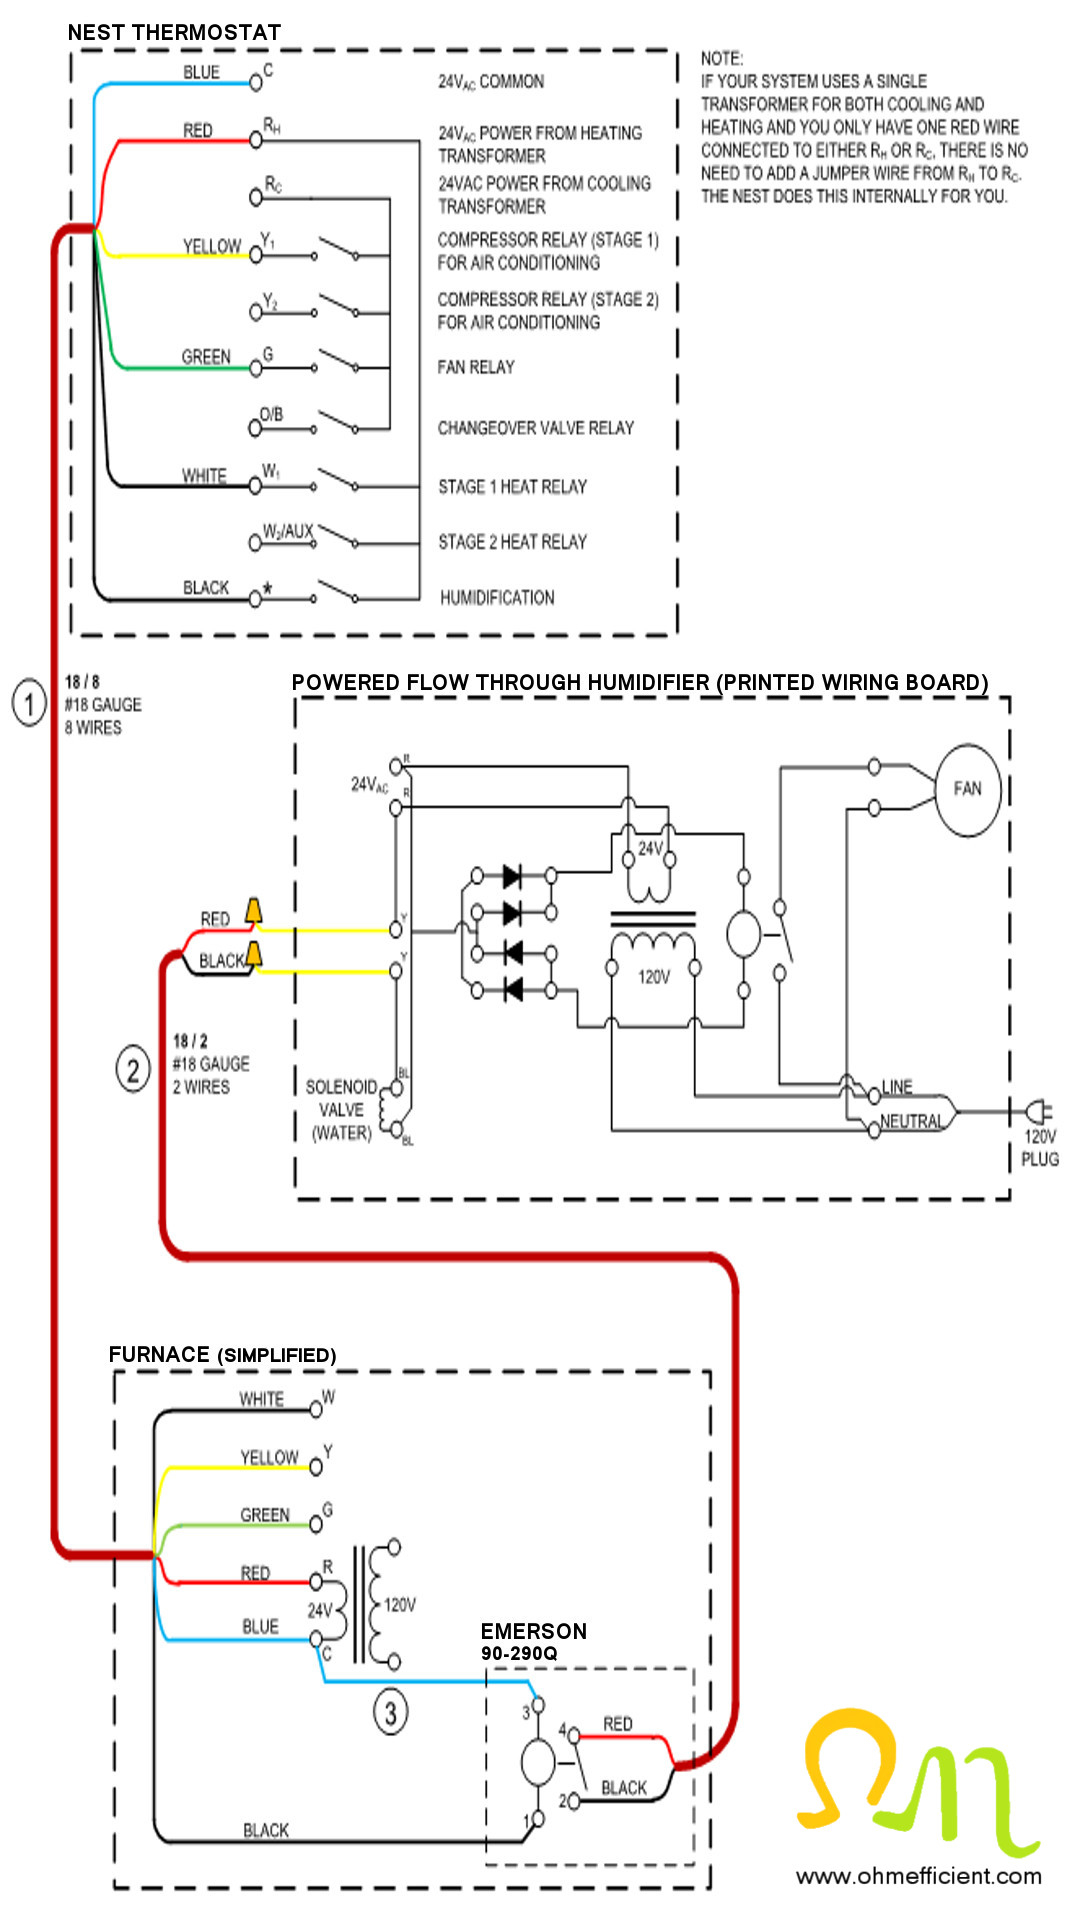 Thermostat Wiring Diagram Wiring Humidifier To Thermostat Today Diagram Database